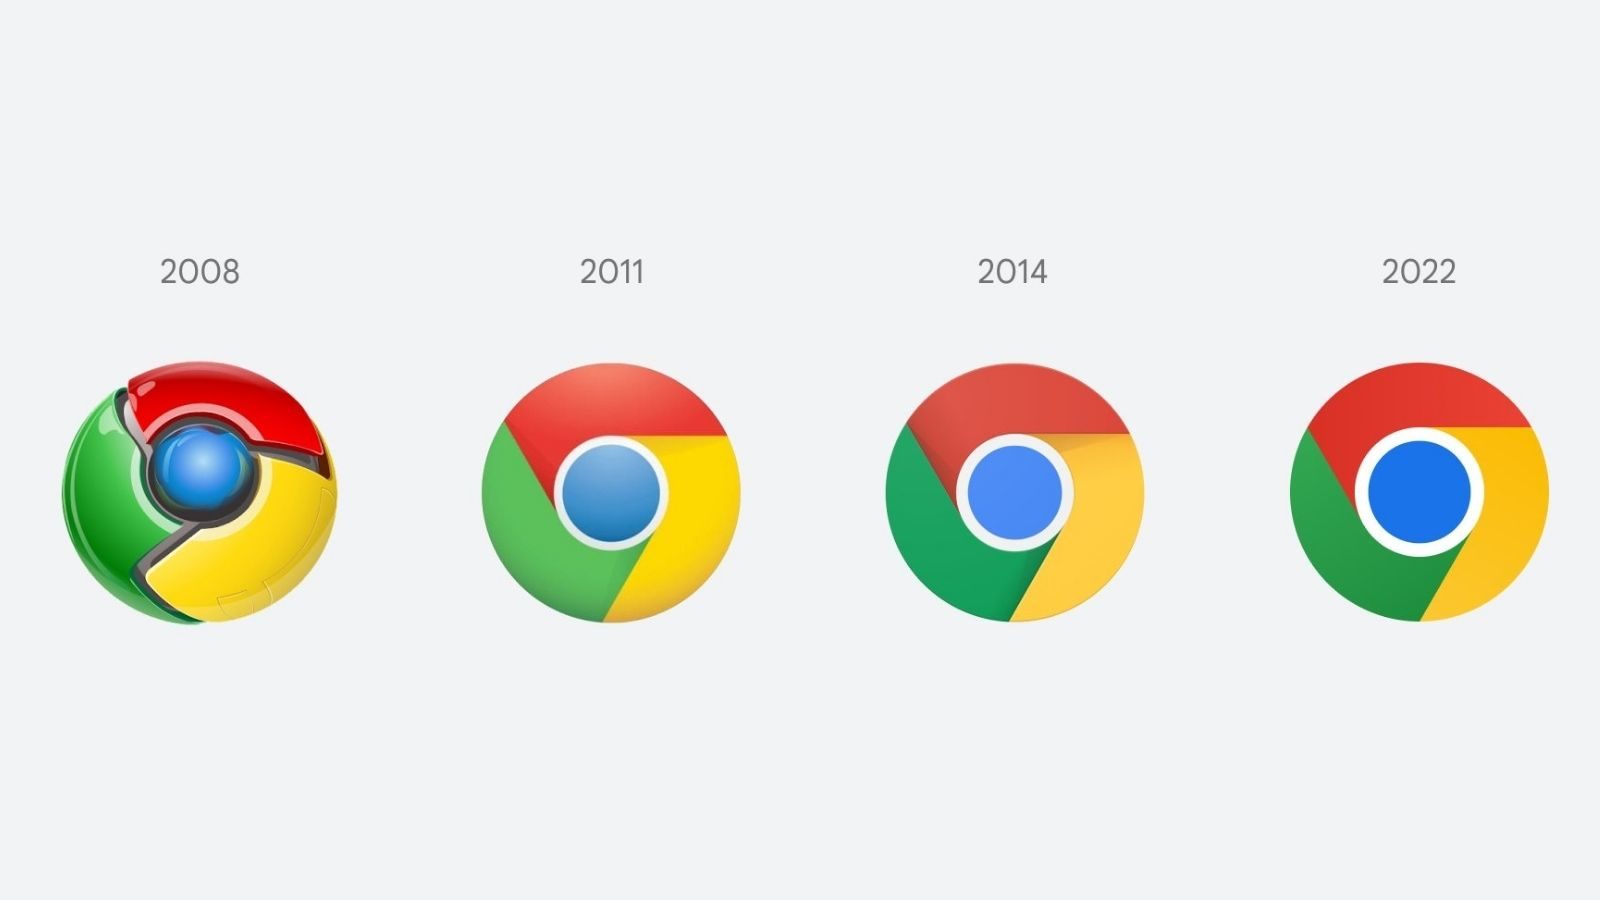 Change in Chrome logo, design has changed 4 times in 14 years